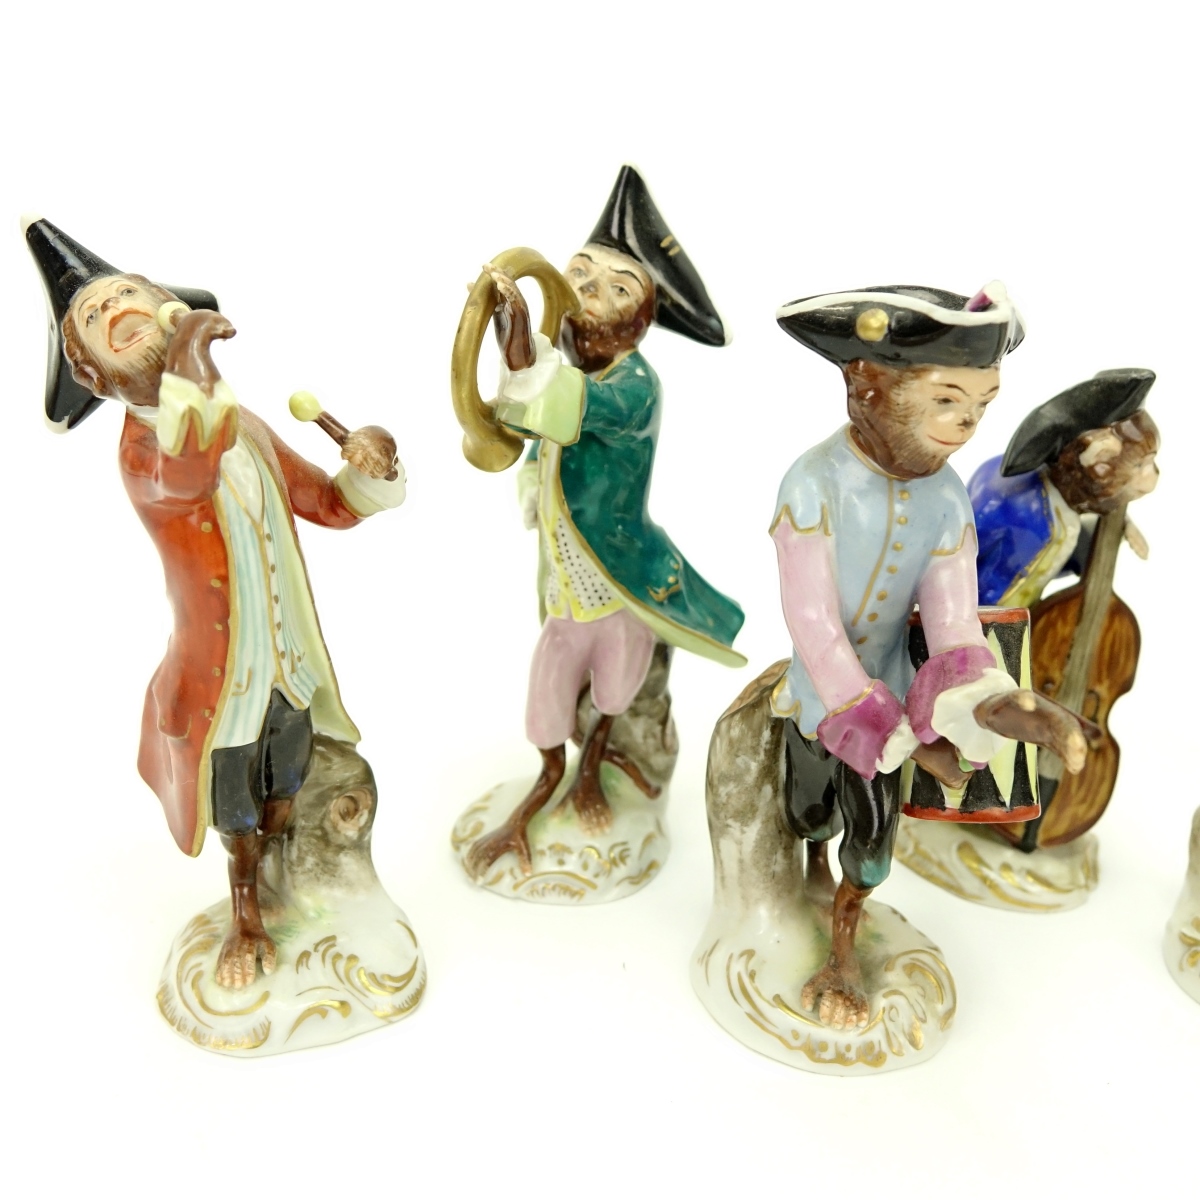 Grouping of Six German and Capodimonte Figurines